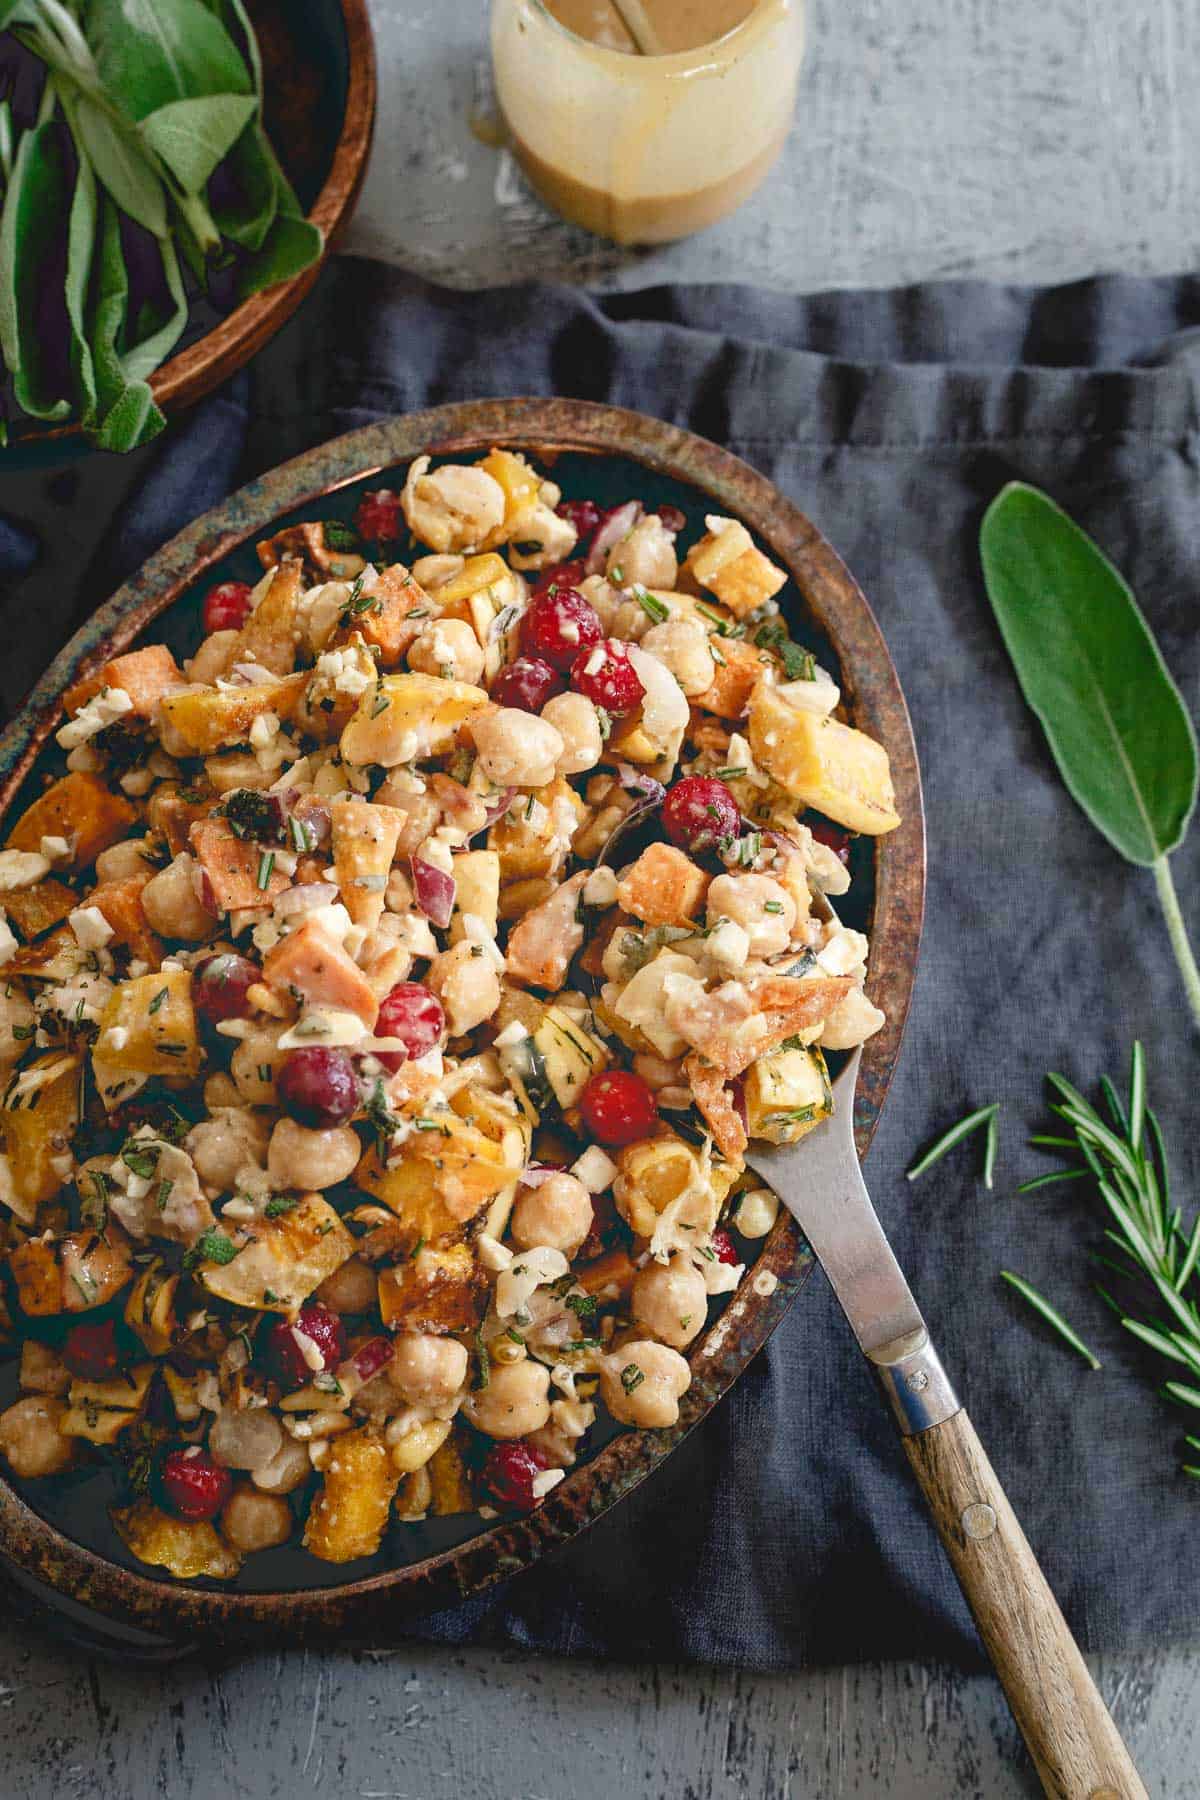 This salad has it all - roasted sweet potatoes, squash, chickpeas, cranberries, feta and a maple tahini dressing for a hearty fall dish packed with flavor.